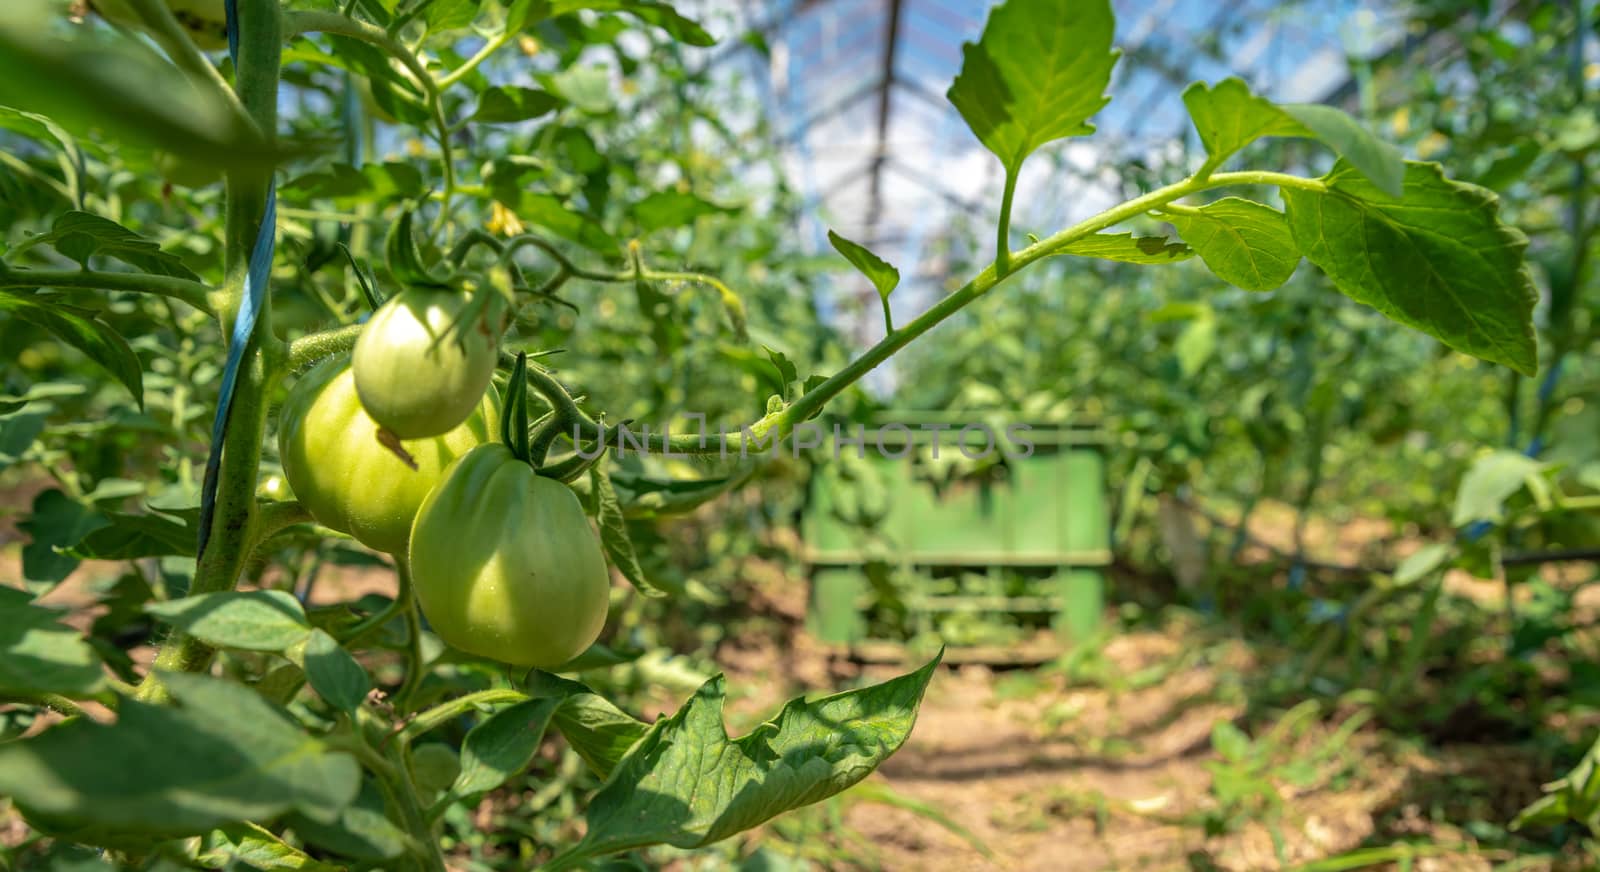 growing tomatoes in organic quality without chemicals in a greenhouse on the farm. healthy food, vegetables by Edophoto